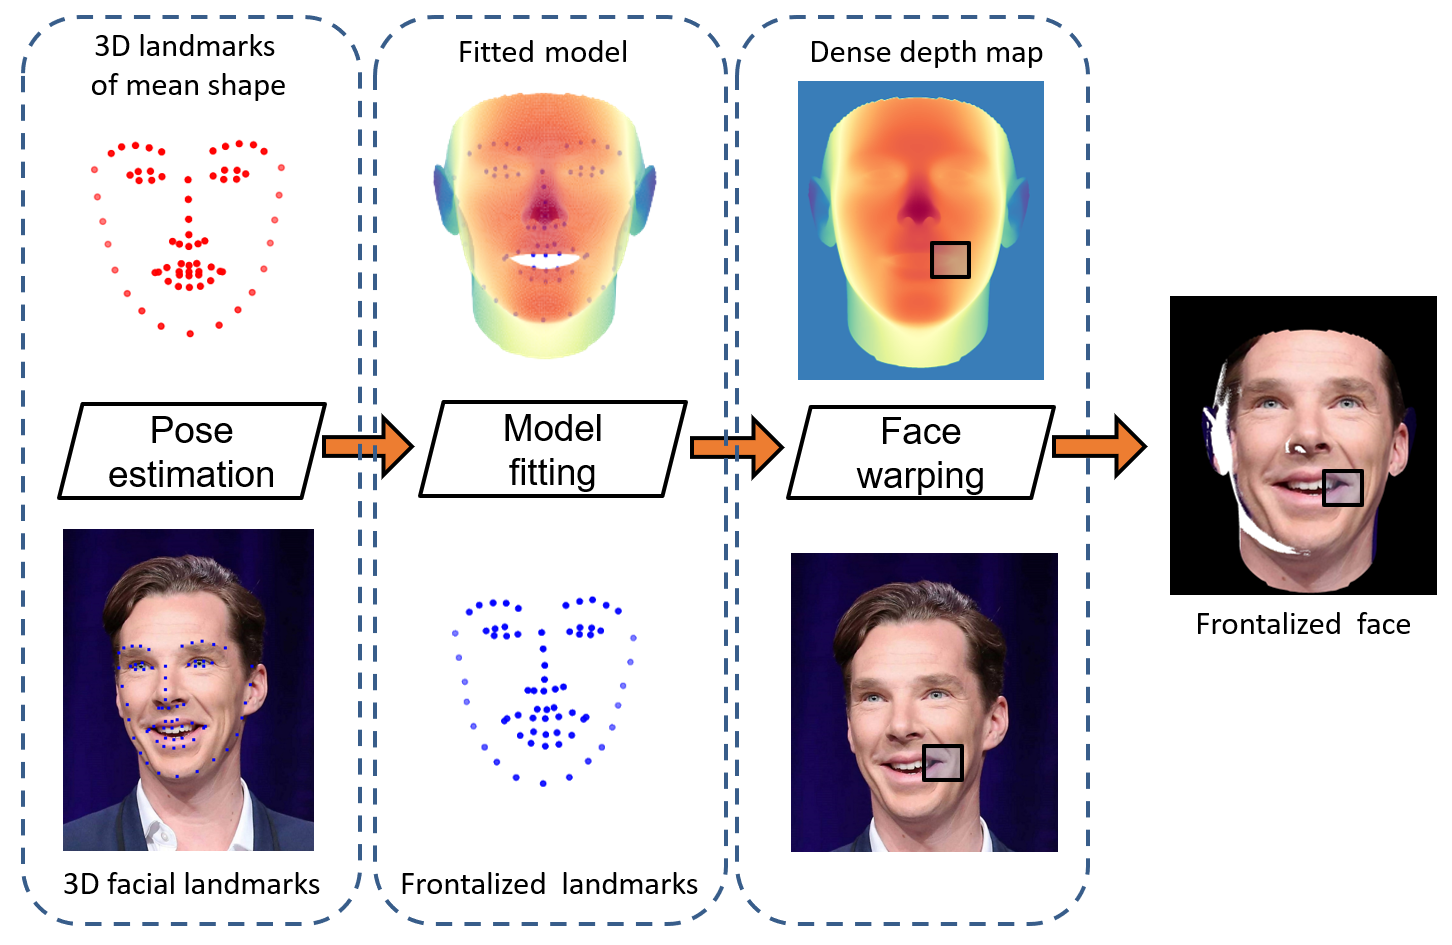 Overview of the proposed method. 3D landmarks extracted from a face (bottom-left) are aligned with 3D vertices associated with a frontal model (top-left). This deformable model is fitted to the frontalized landmarks (bottom-middle), yielding a deformed model aligned with the landmarks (top-middle). A dense depth map is computed by interpolating the 3D vertices of the triangulated mesh of the deformed model (top-right). This depth map is combined with the input face which is warped onto the frontal view (bottom-right).